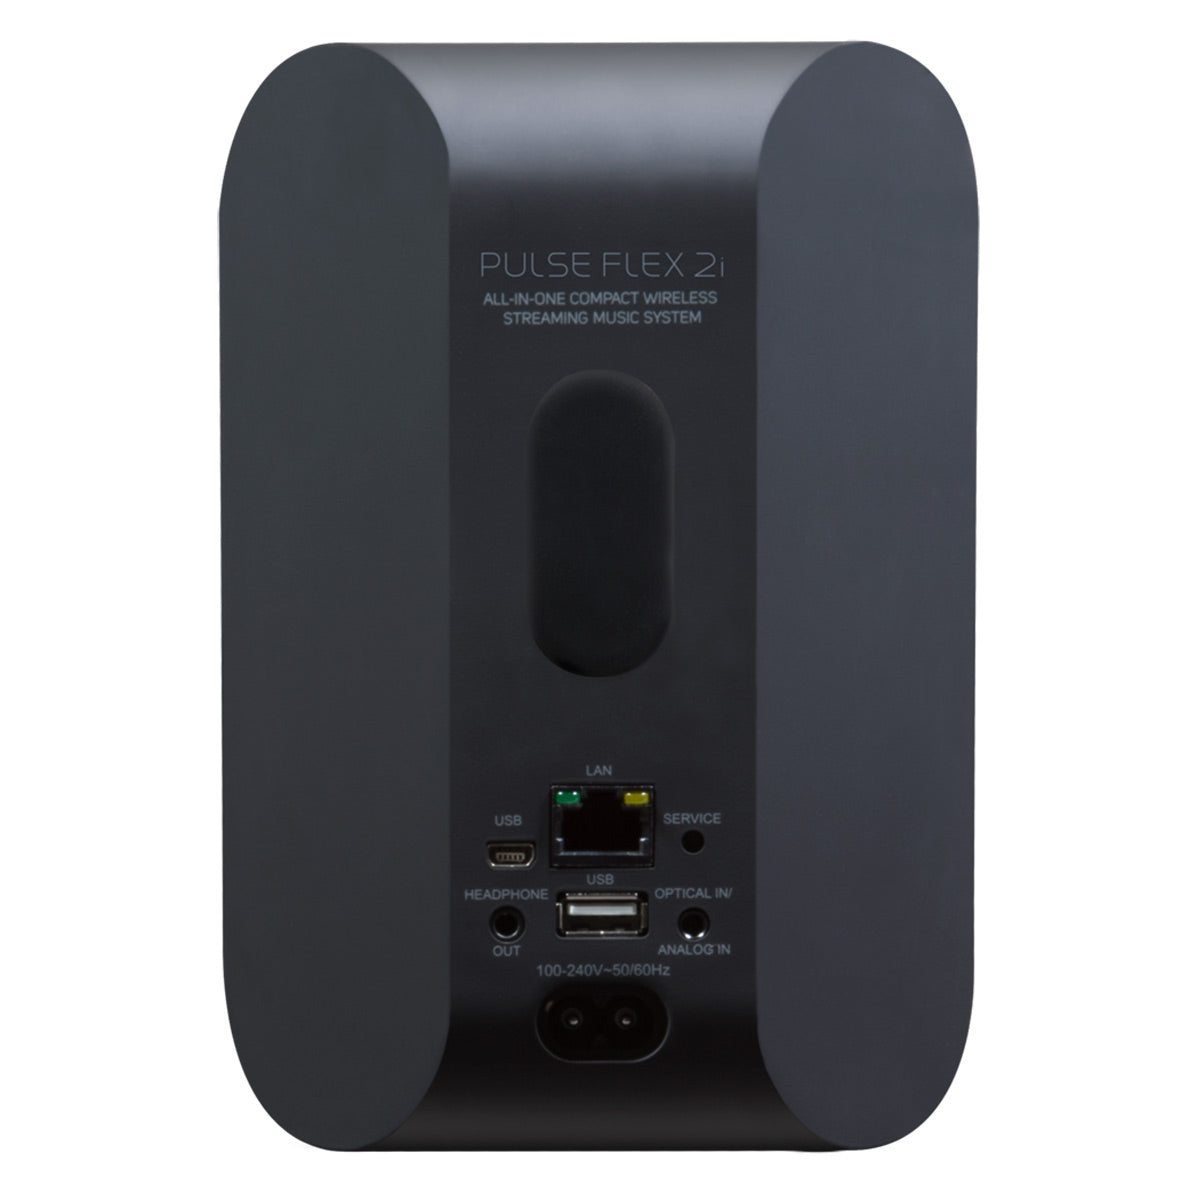 Bluesound PULSE FLEX 2i Portable Wireless Multi-Room Smart Speaker with Bluetooth, Compatible with Alexa and Siri - Each (Black)